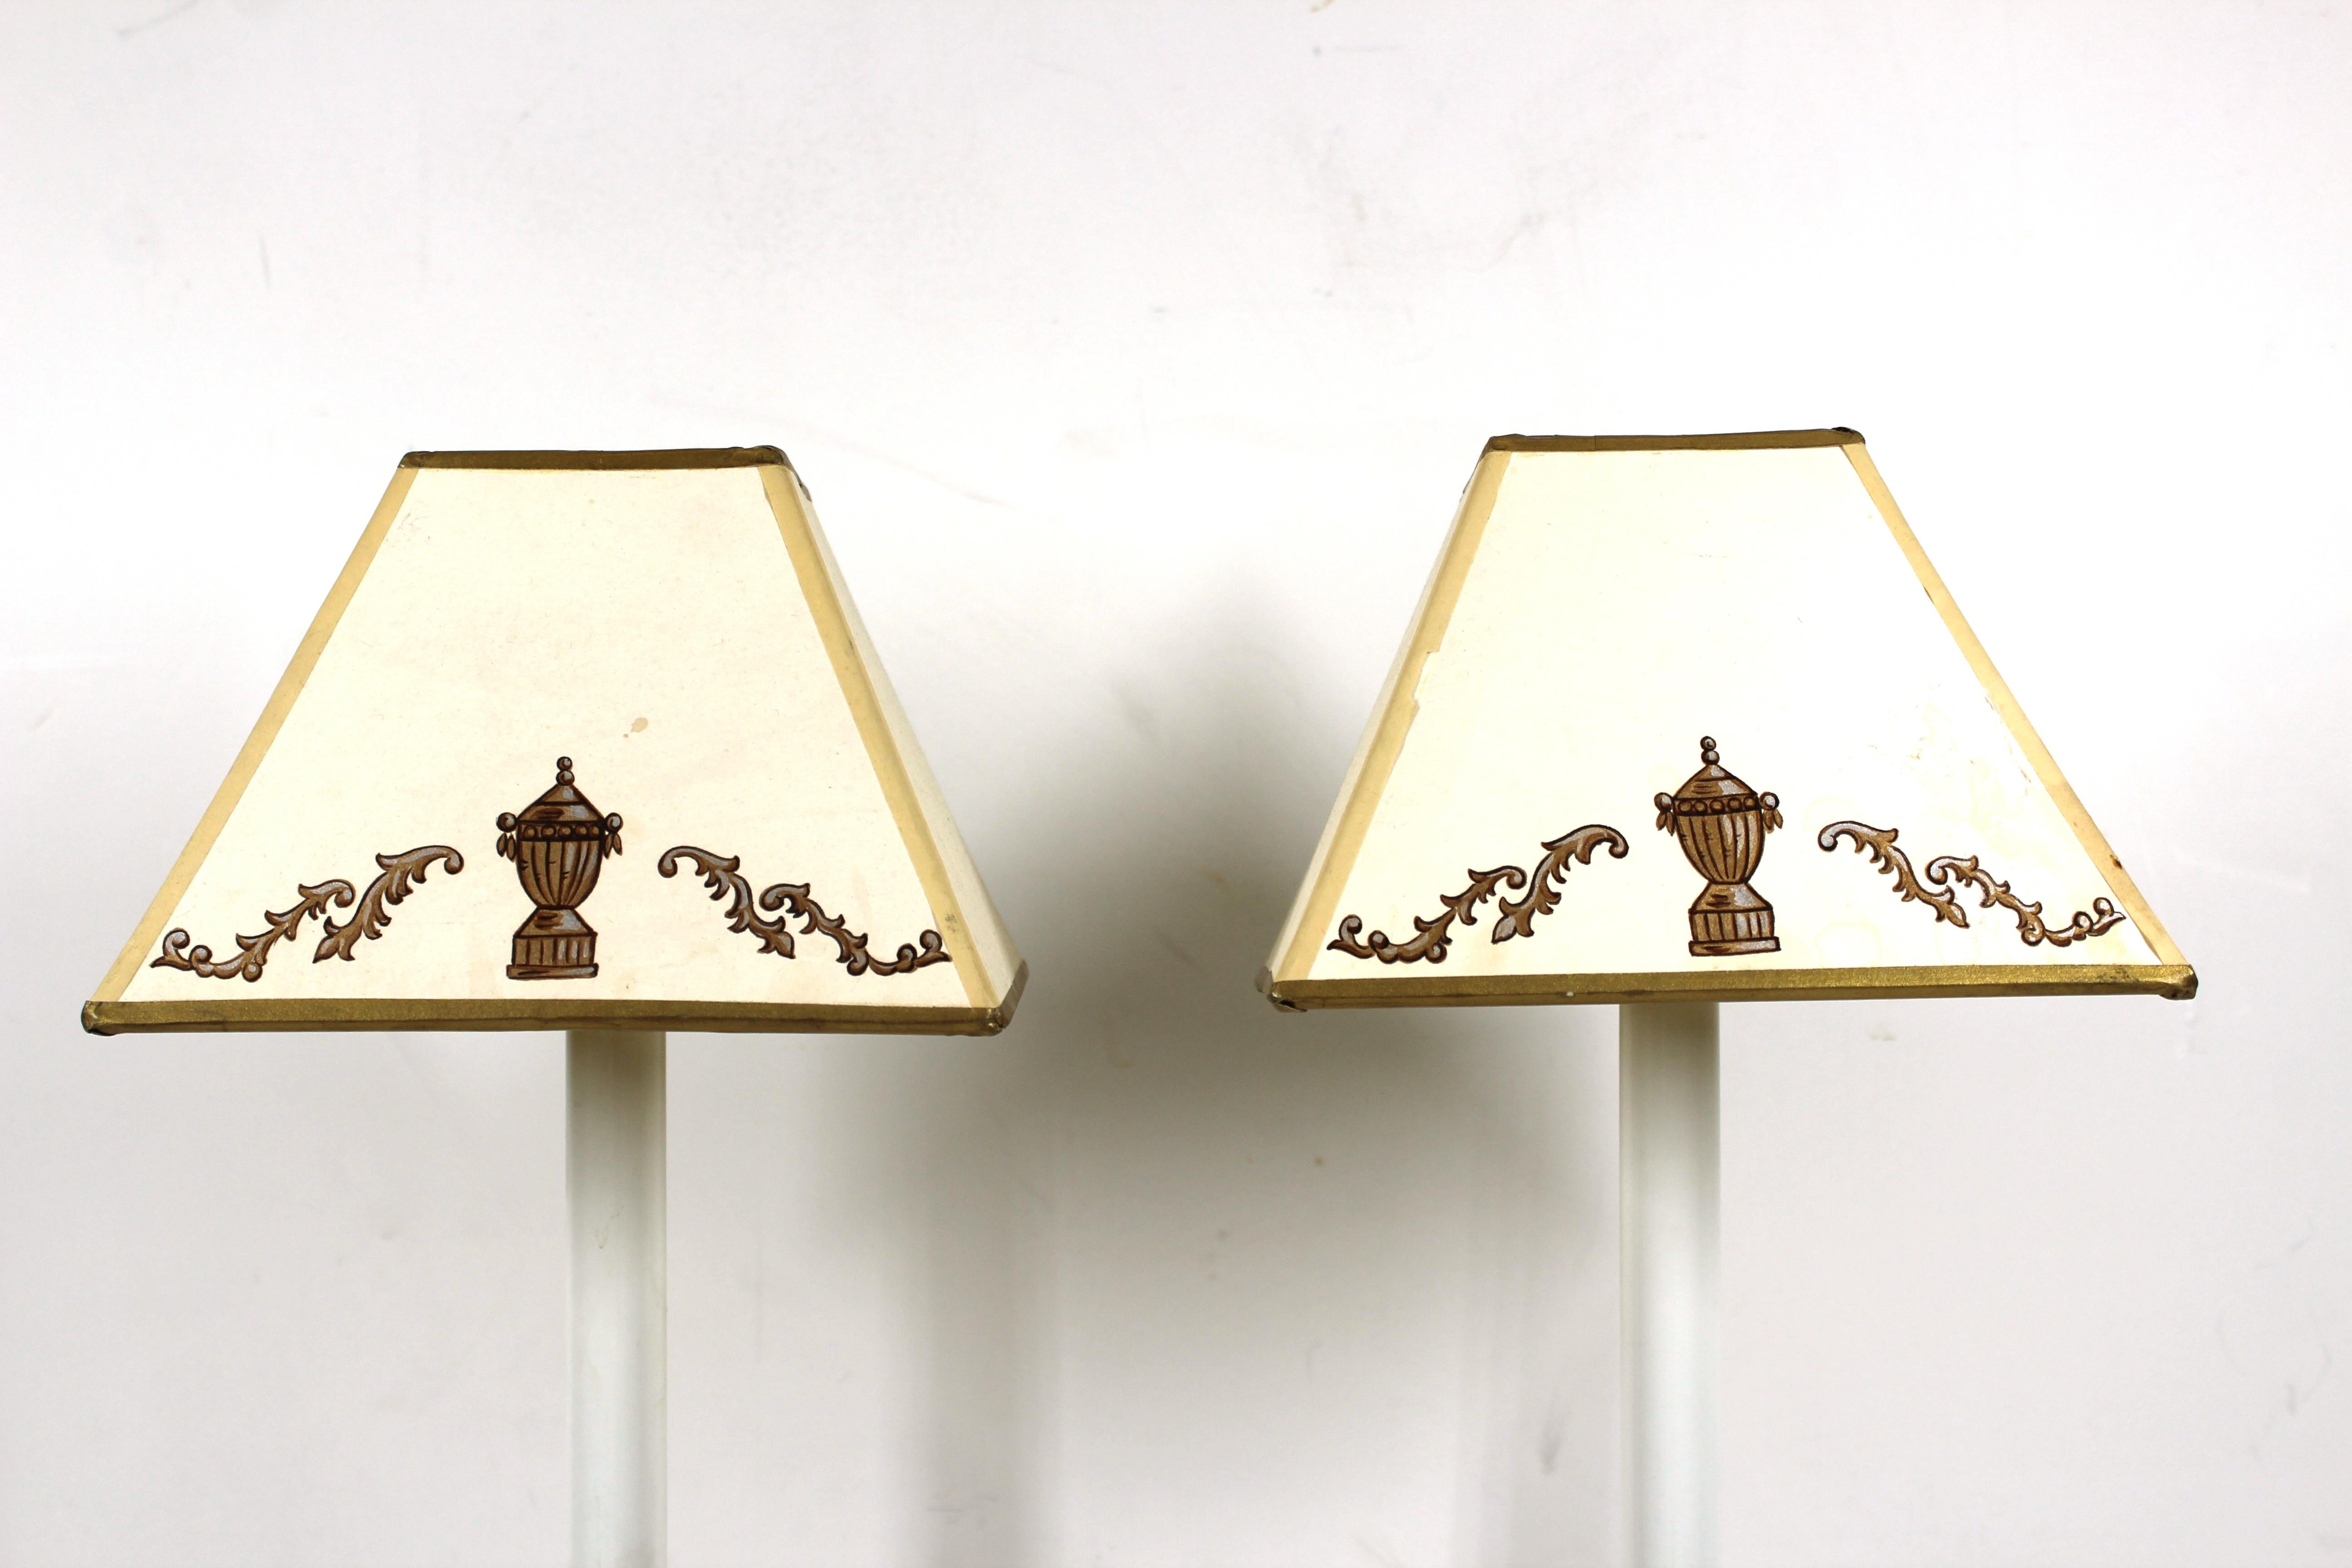 Continental pair of diminutive neoclassical Revival manner candlestick table lamps with partially gilt porcelain column bases and hand painted shades.
